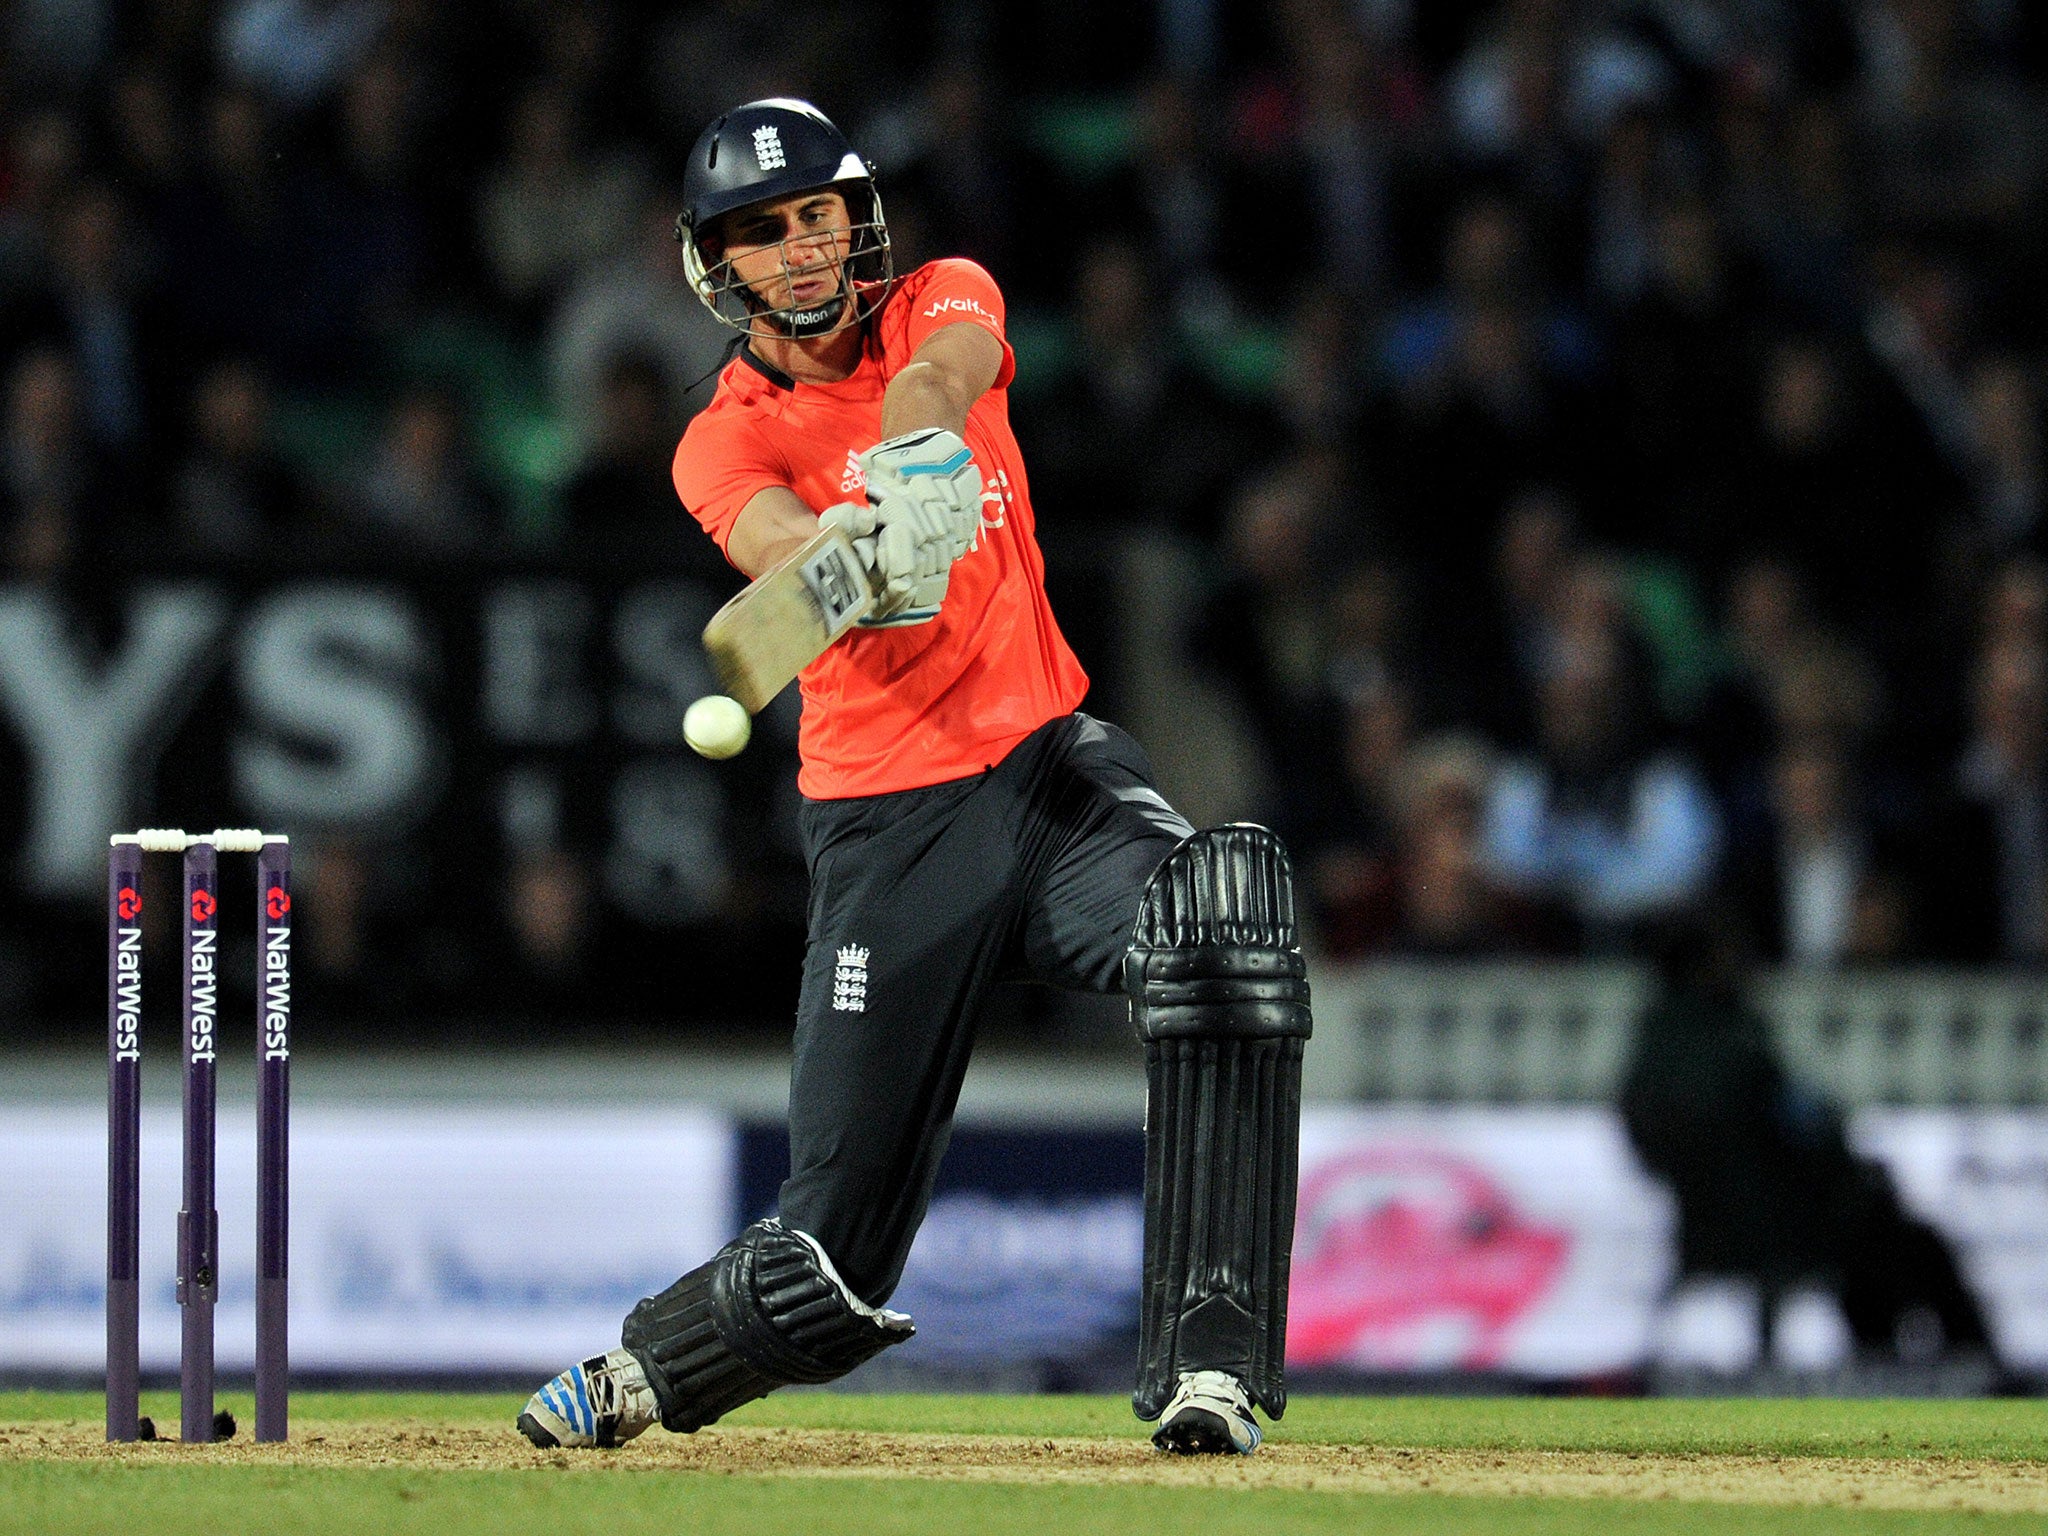 Alex Hales has been named in the latest England ODI squad